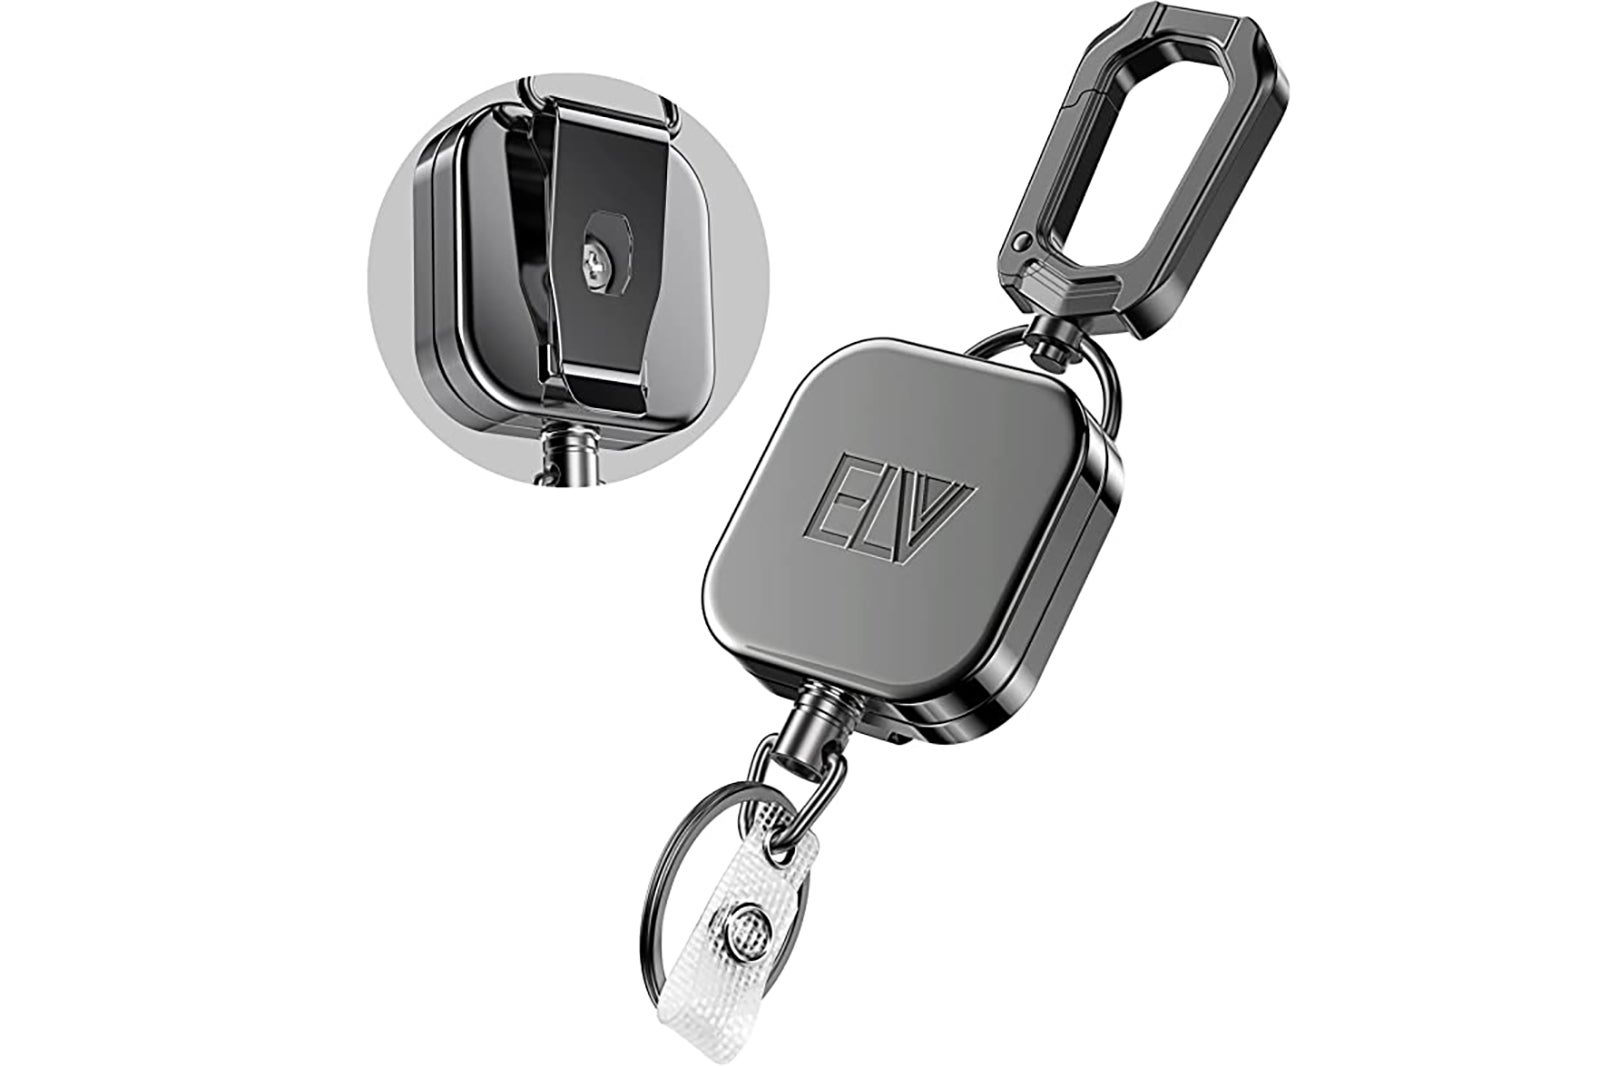 ELV Badge Holder, ID Badge Card Holder Wallet with 5 Card Slots, 1 RFID Blocking Pocket, Retractable Reel and Neck Lanyard Strap for Offices ID